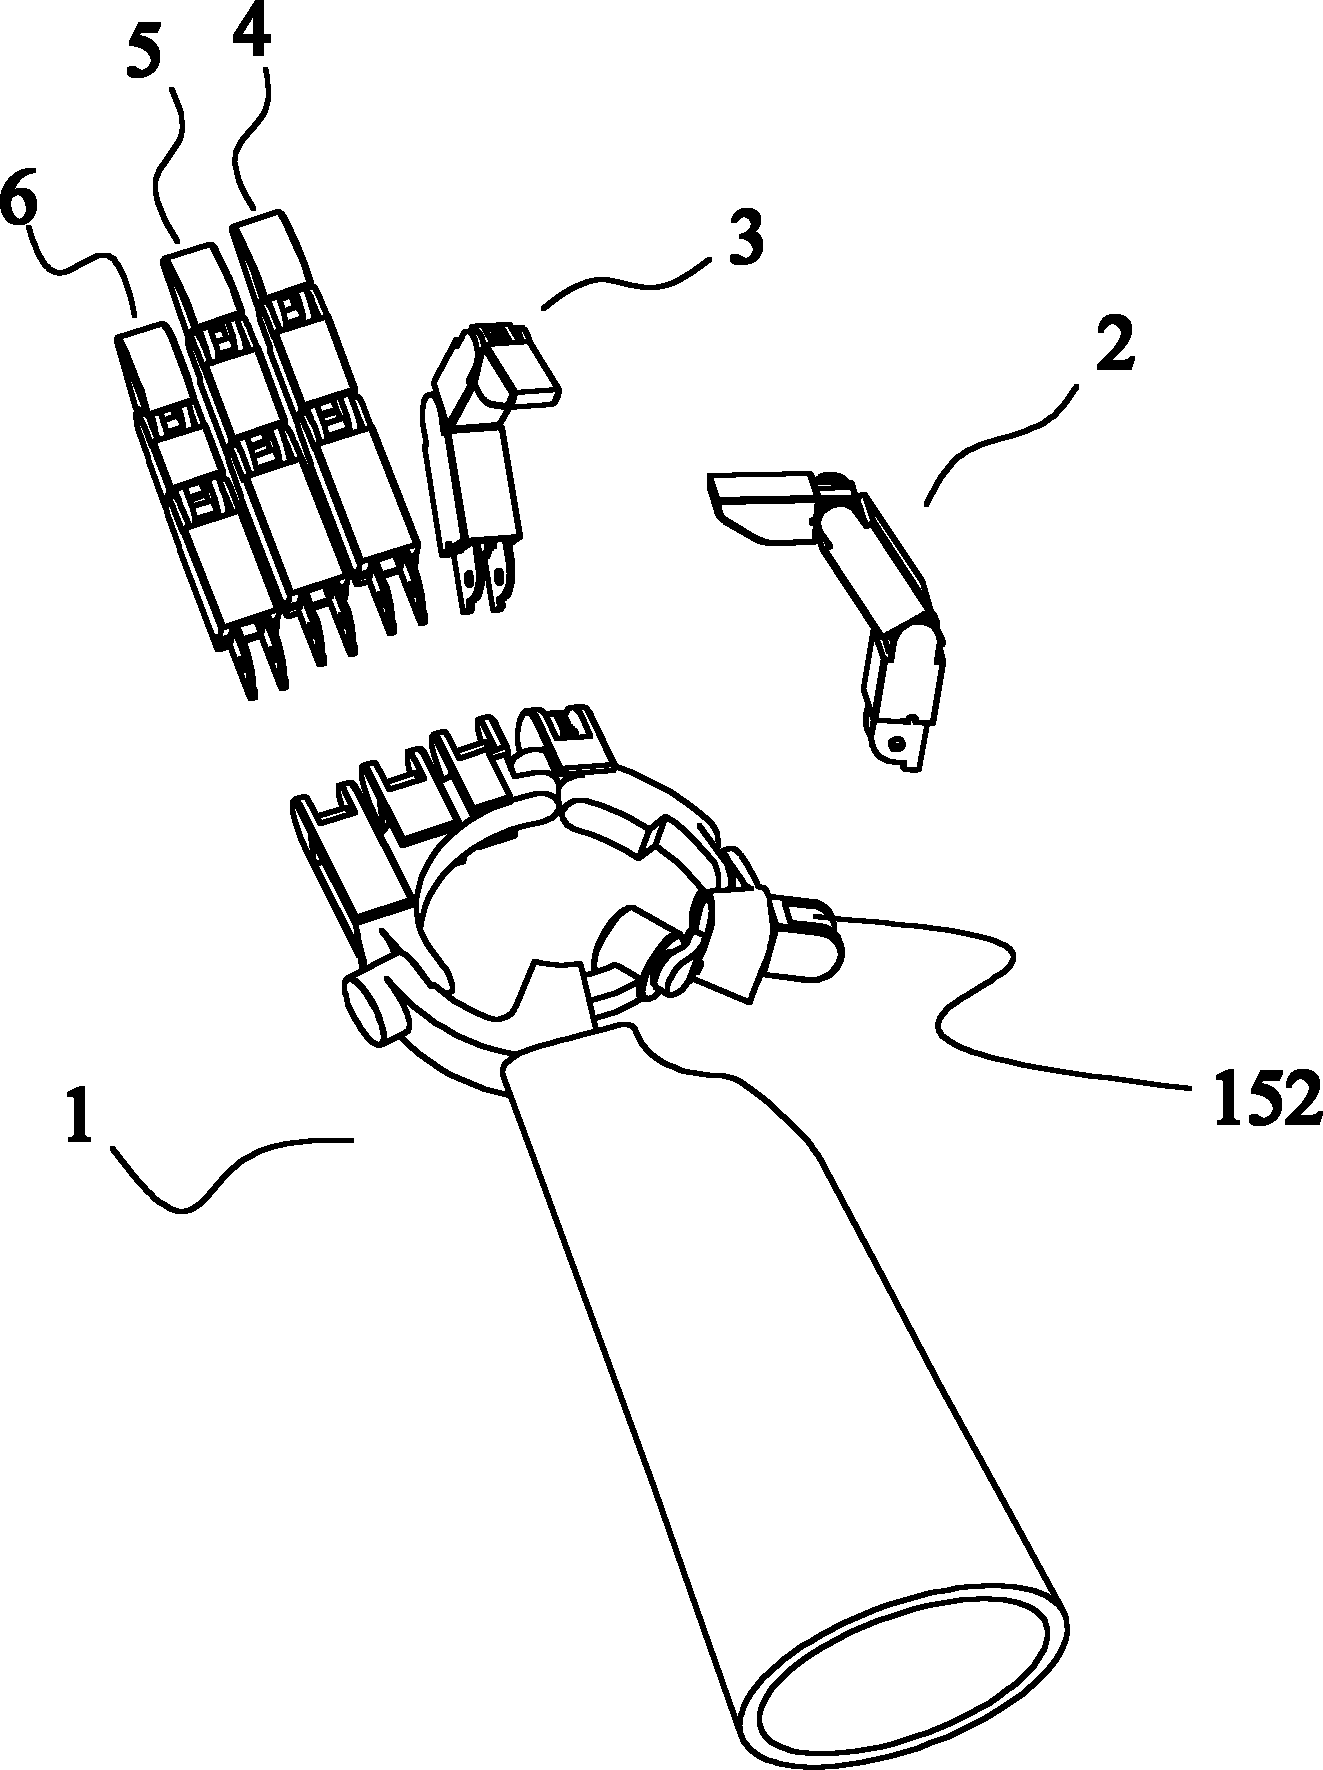 Humanoid dexterous hand with variable-shape palm